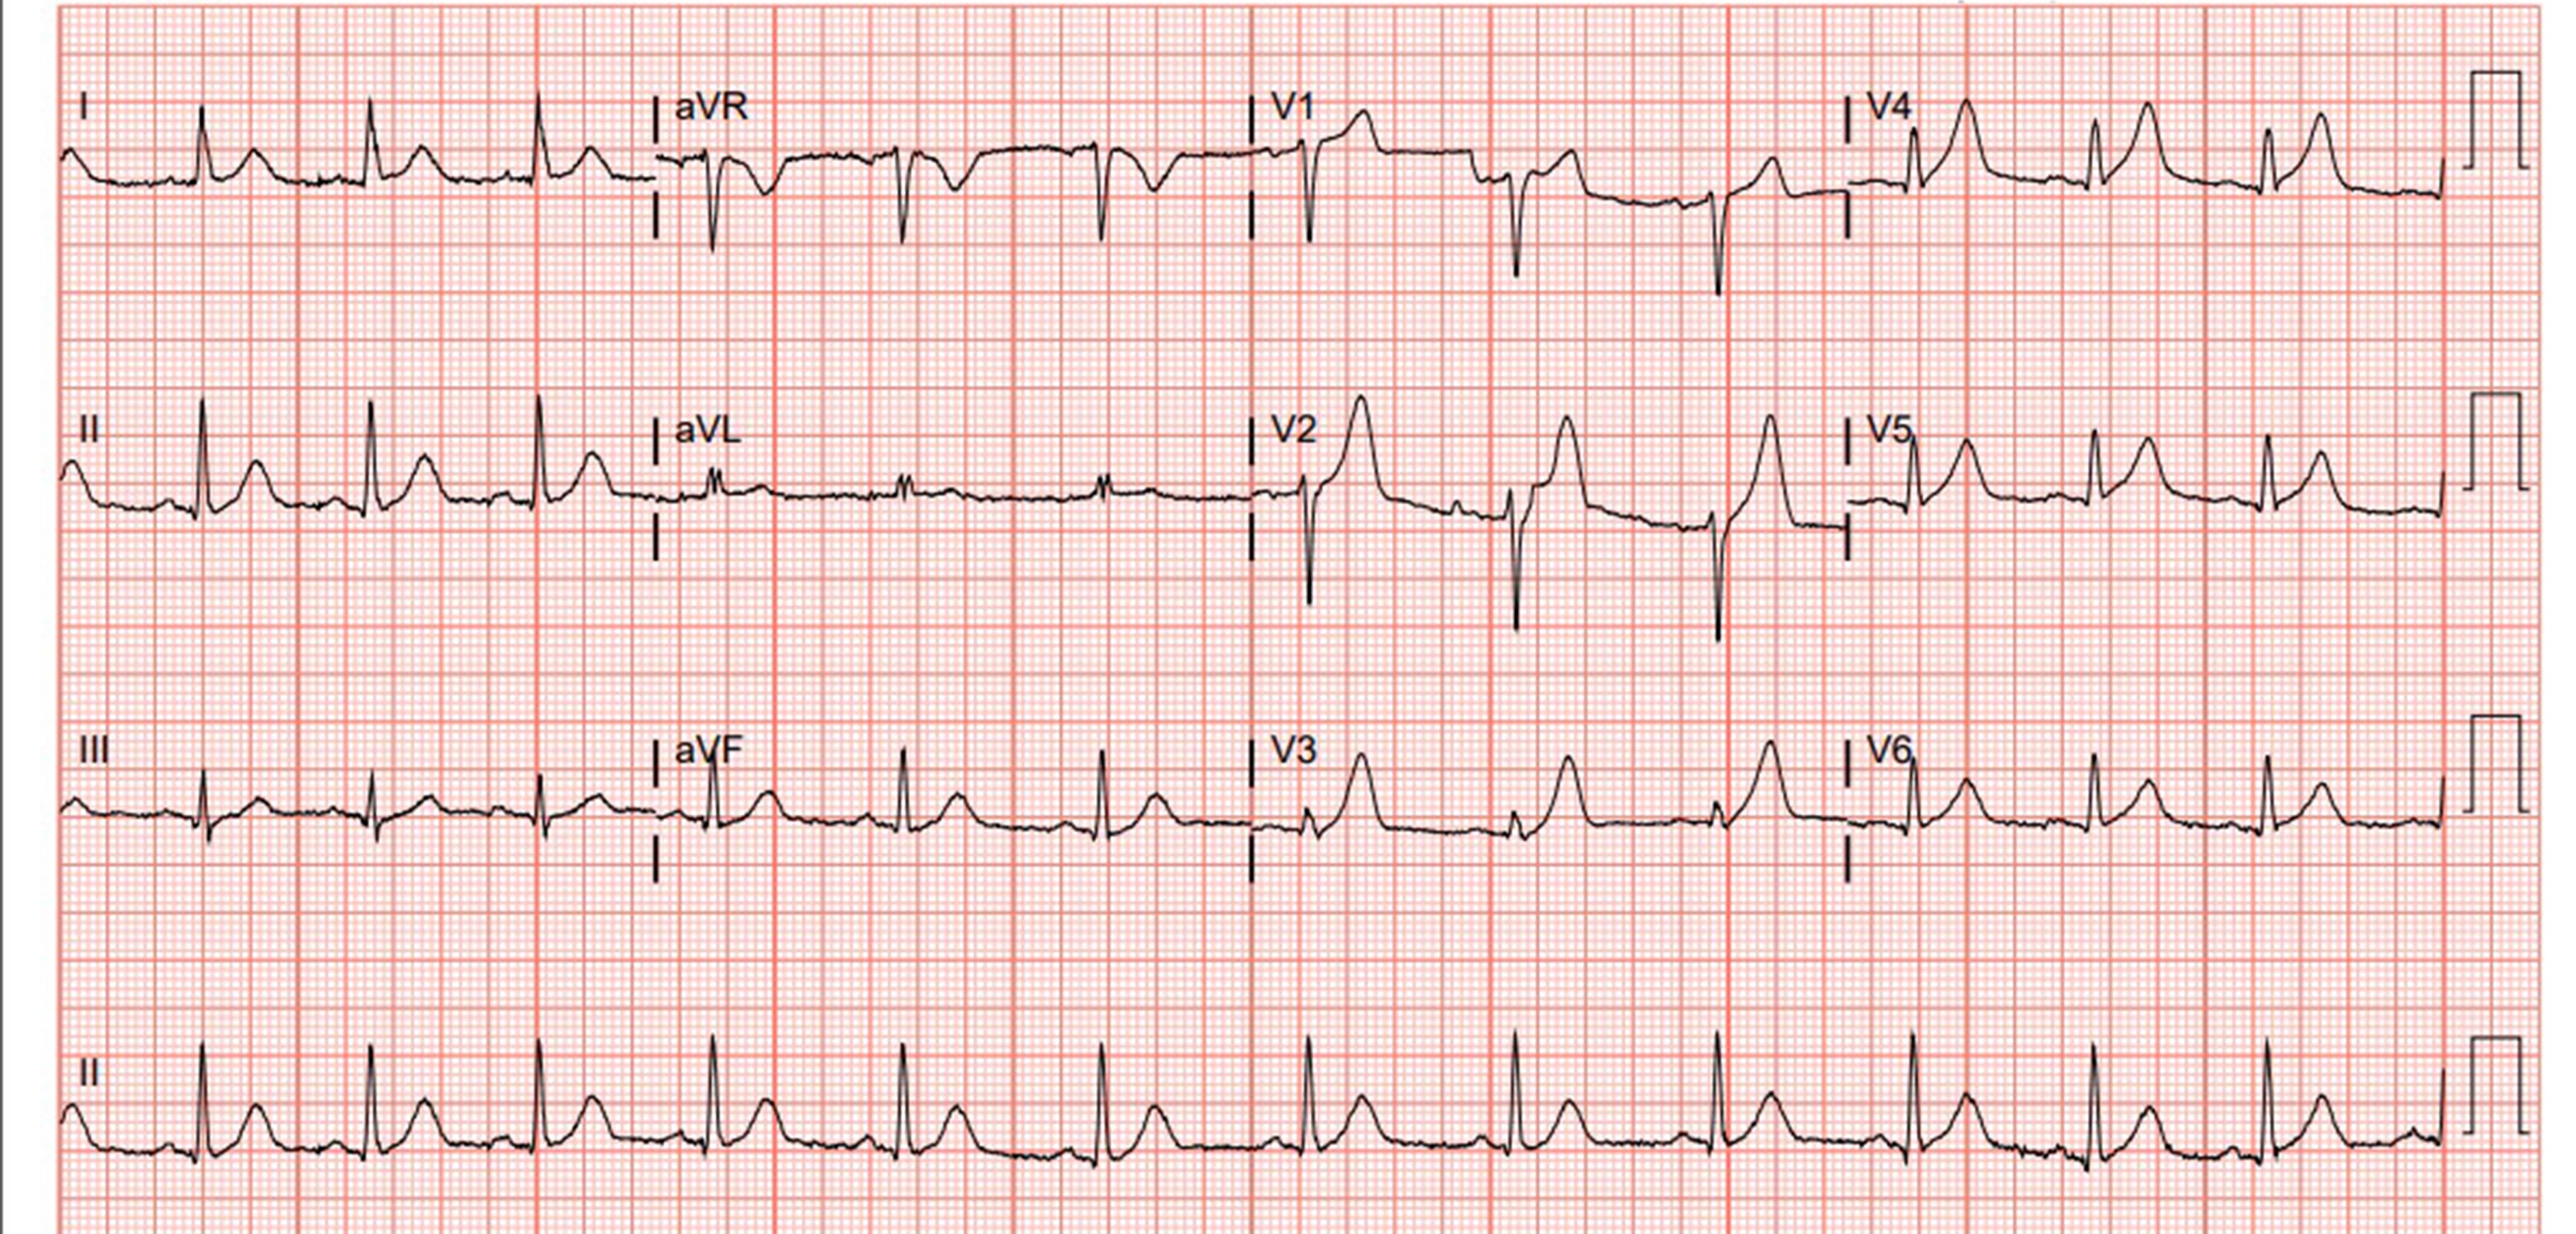 what is the meaning of unconfirmed report in ecg